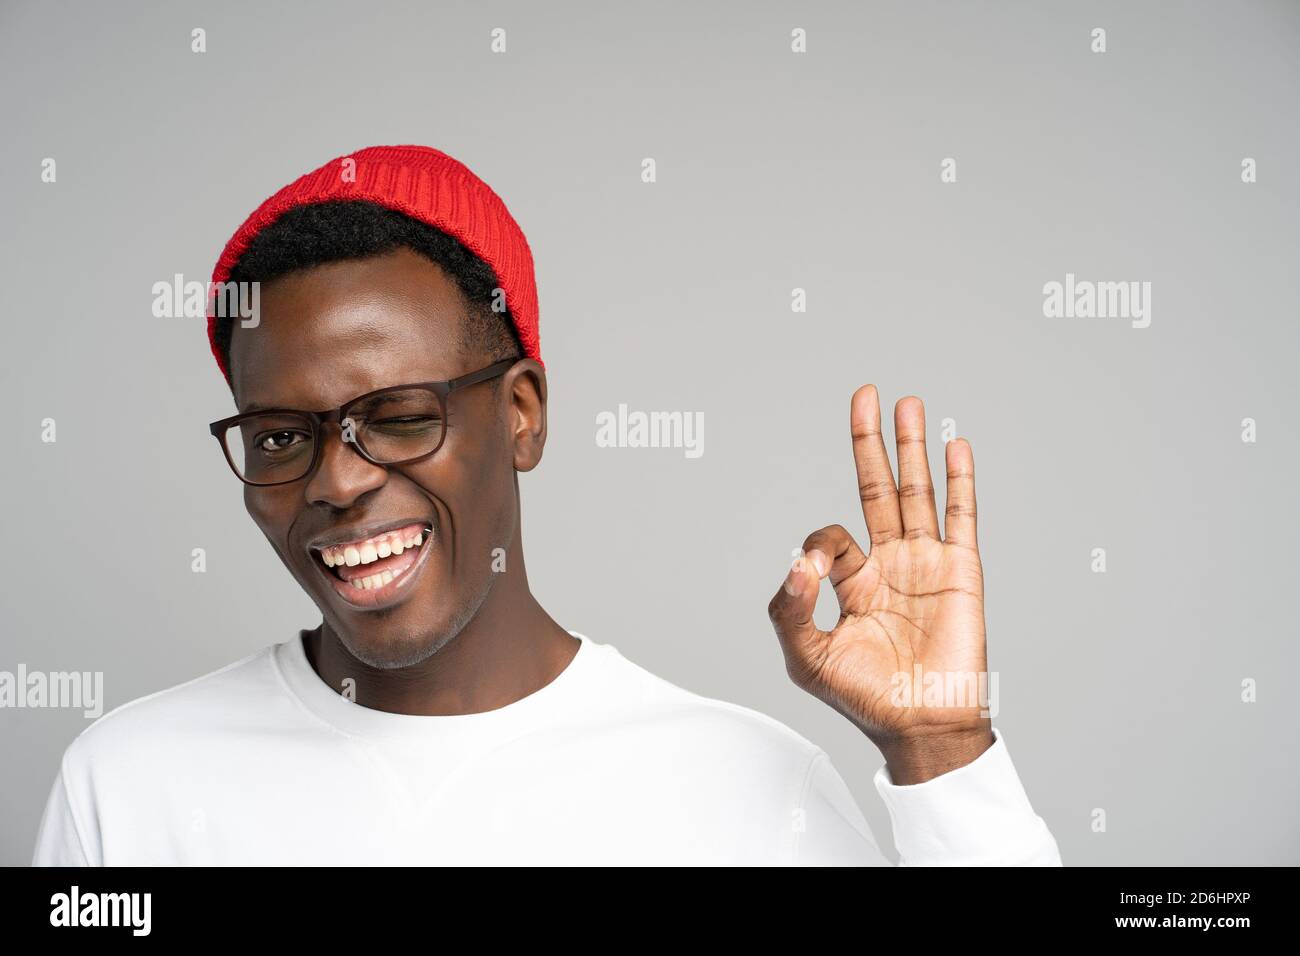 Cheerful playful young Afro American man wear red hat in good mood smiling broadly, winking, showing okay gesture over studio grey background. Positiv Stock Photo